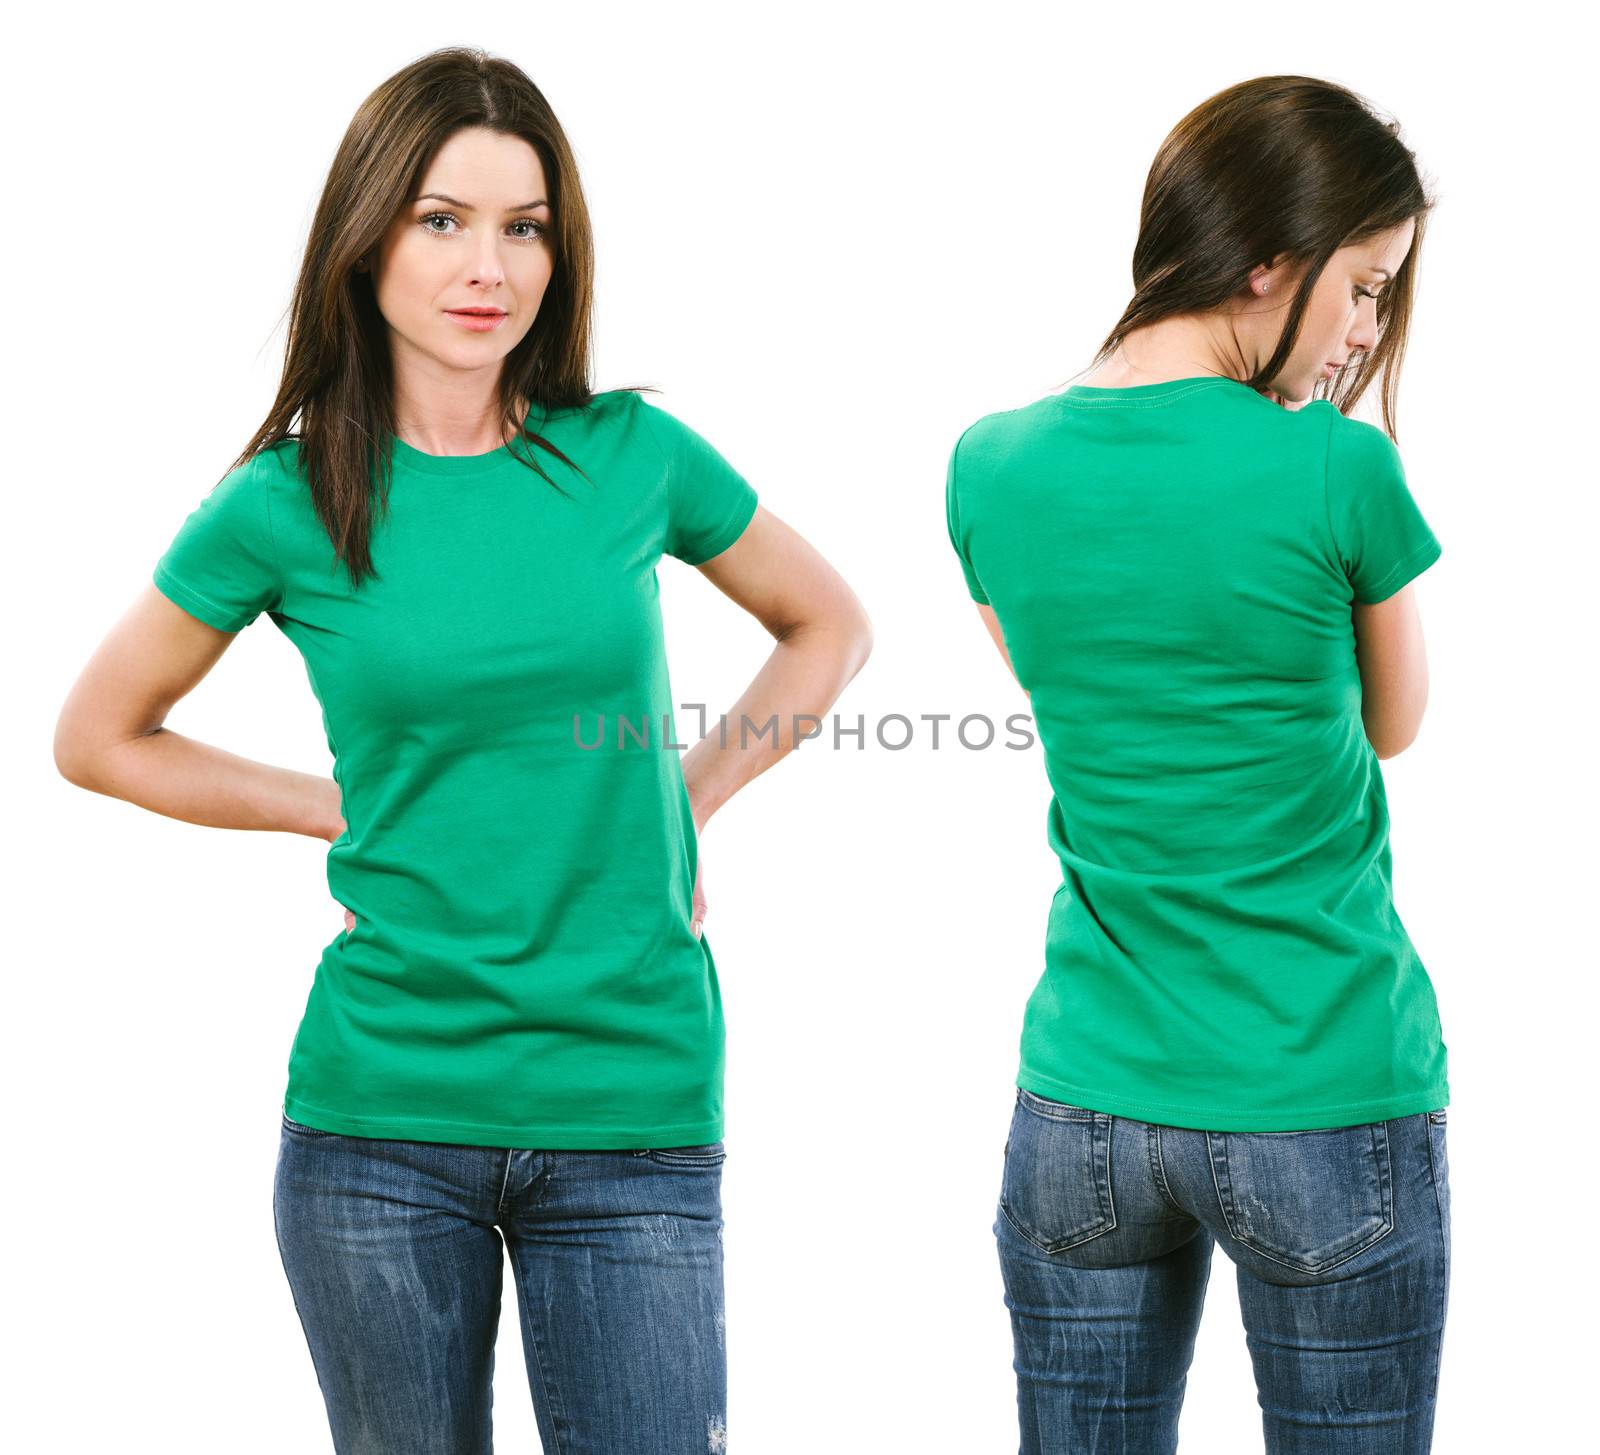 Brunette with blank green shirt by sumners